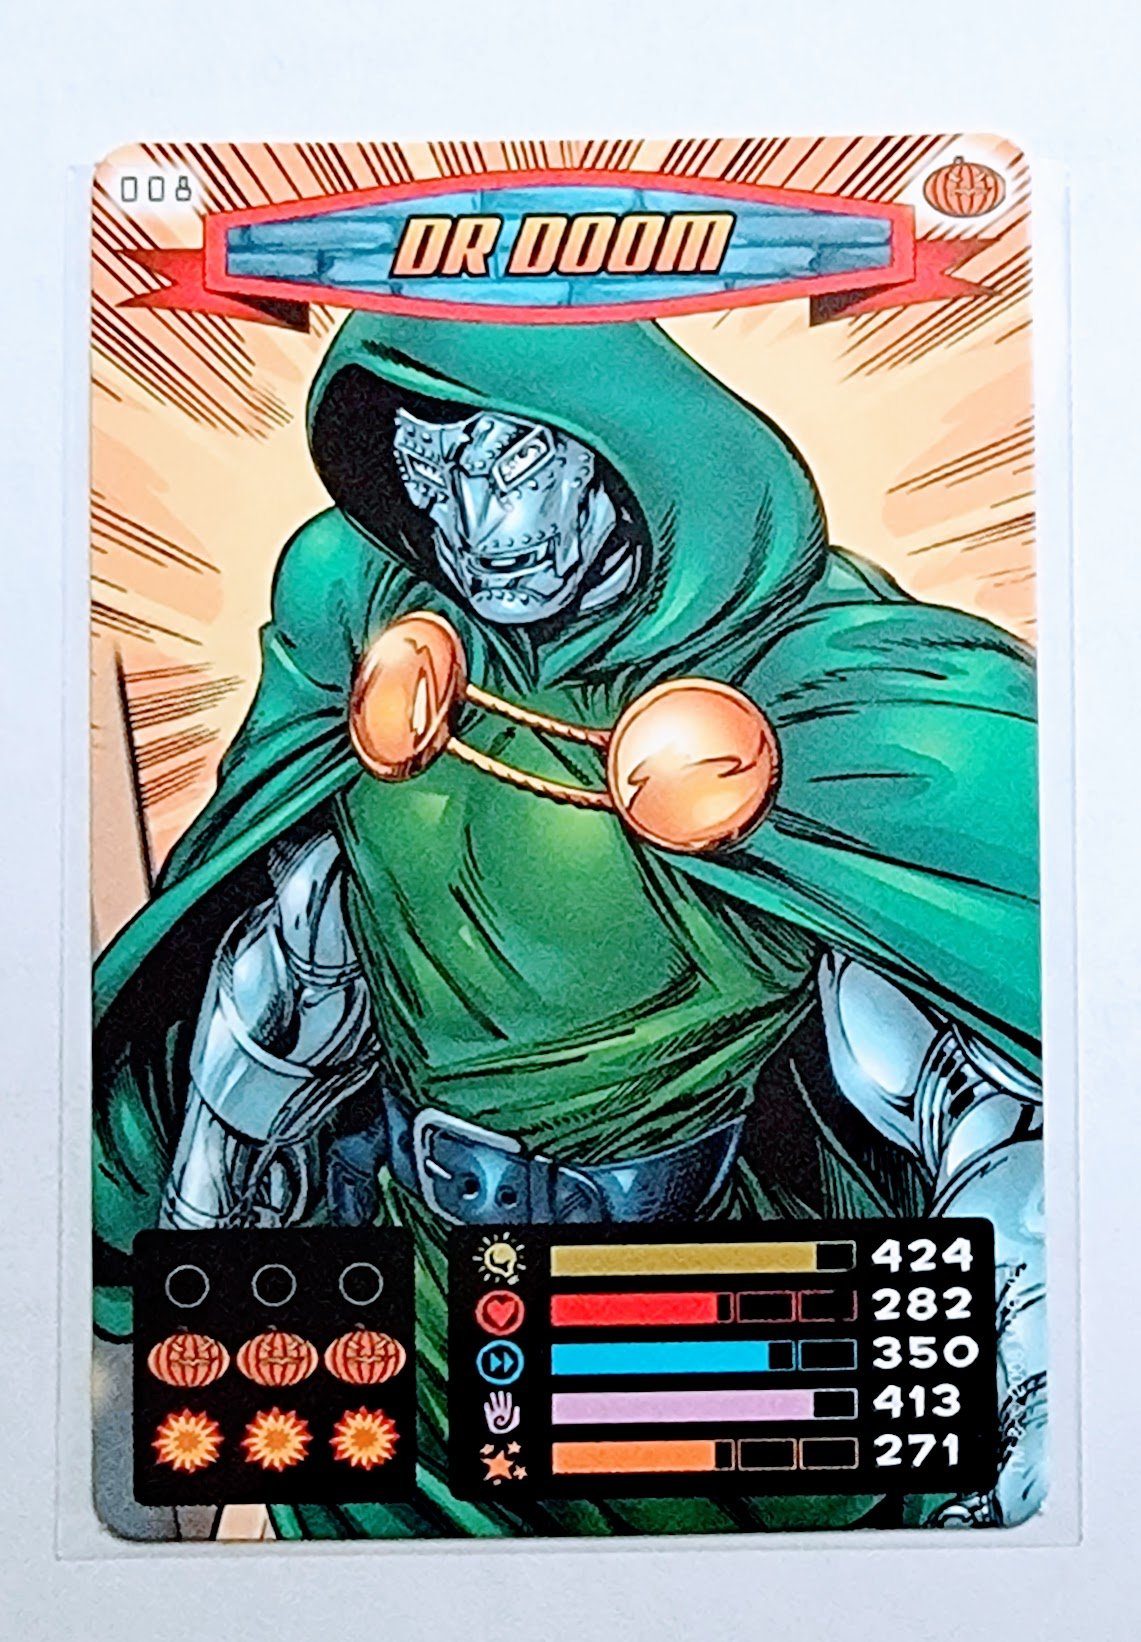 2008 Spiderman Heroes and Villains Dr. Doom #008 Marvel Booster Trading Card UPTI simple Xclusive Collectibles   